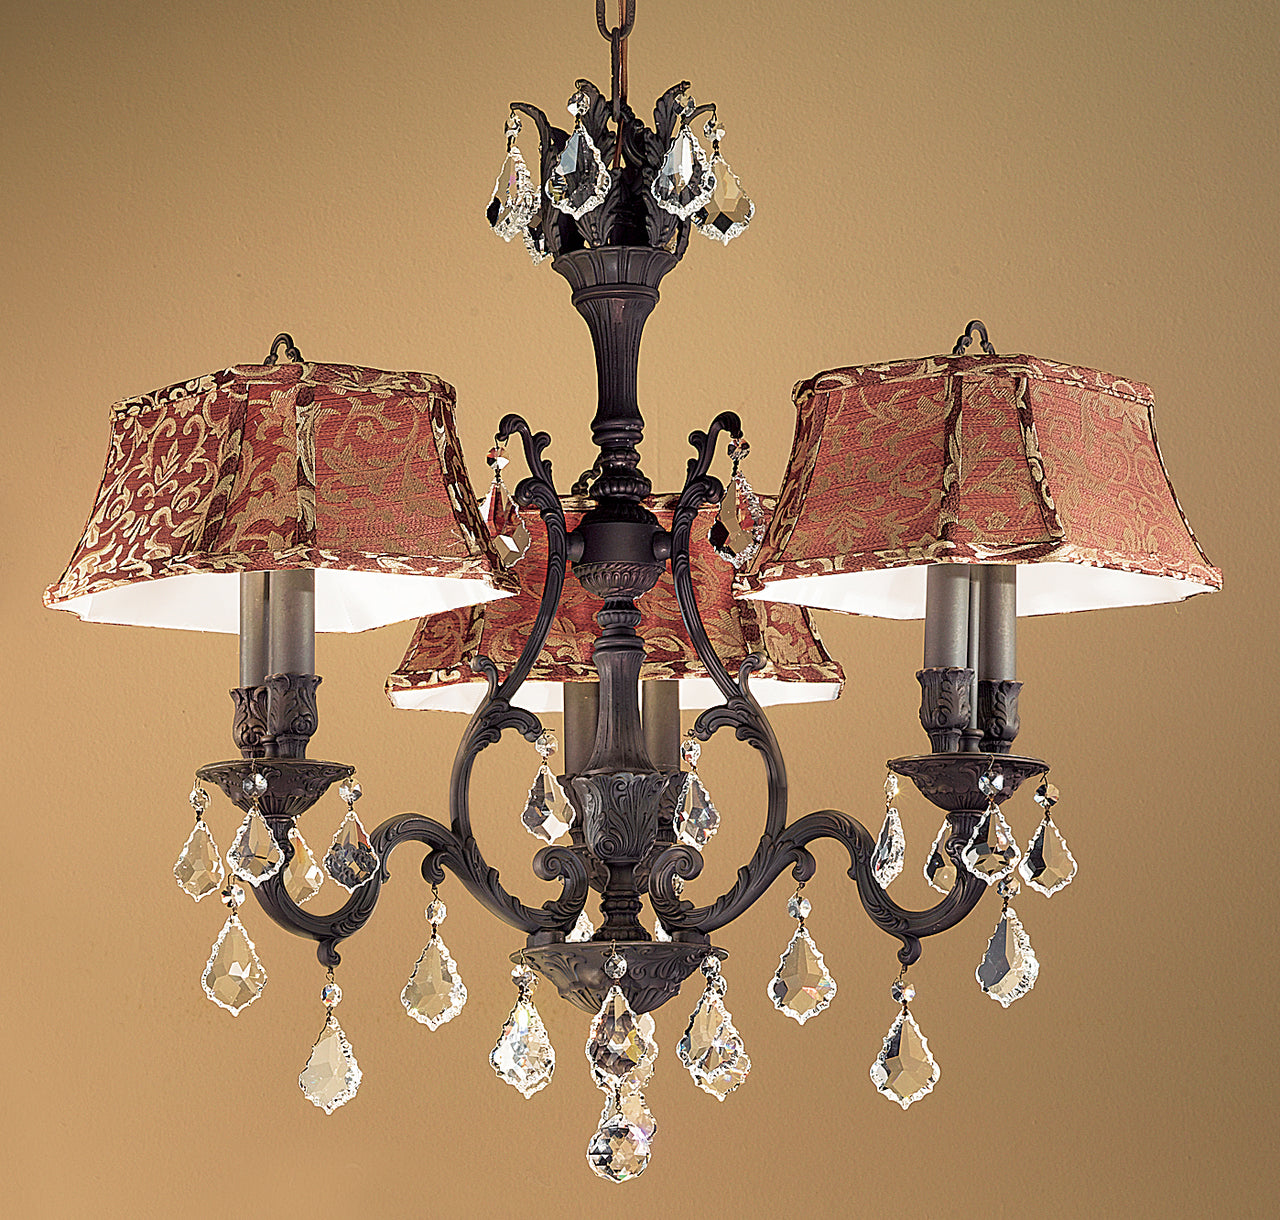 Classic Lighting 57363 FG SC Majestic Crystal Chandelier in French Gold (Imported from Spain)